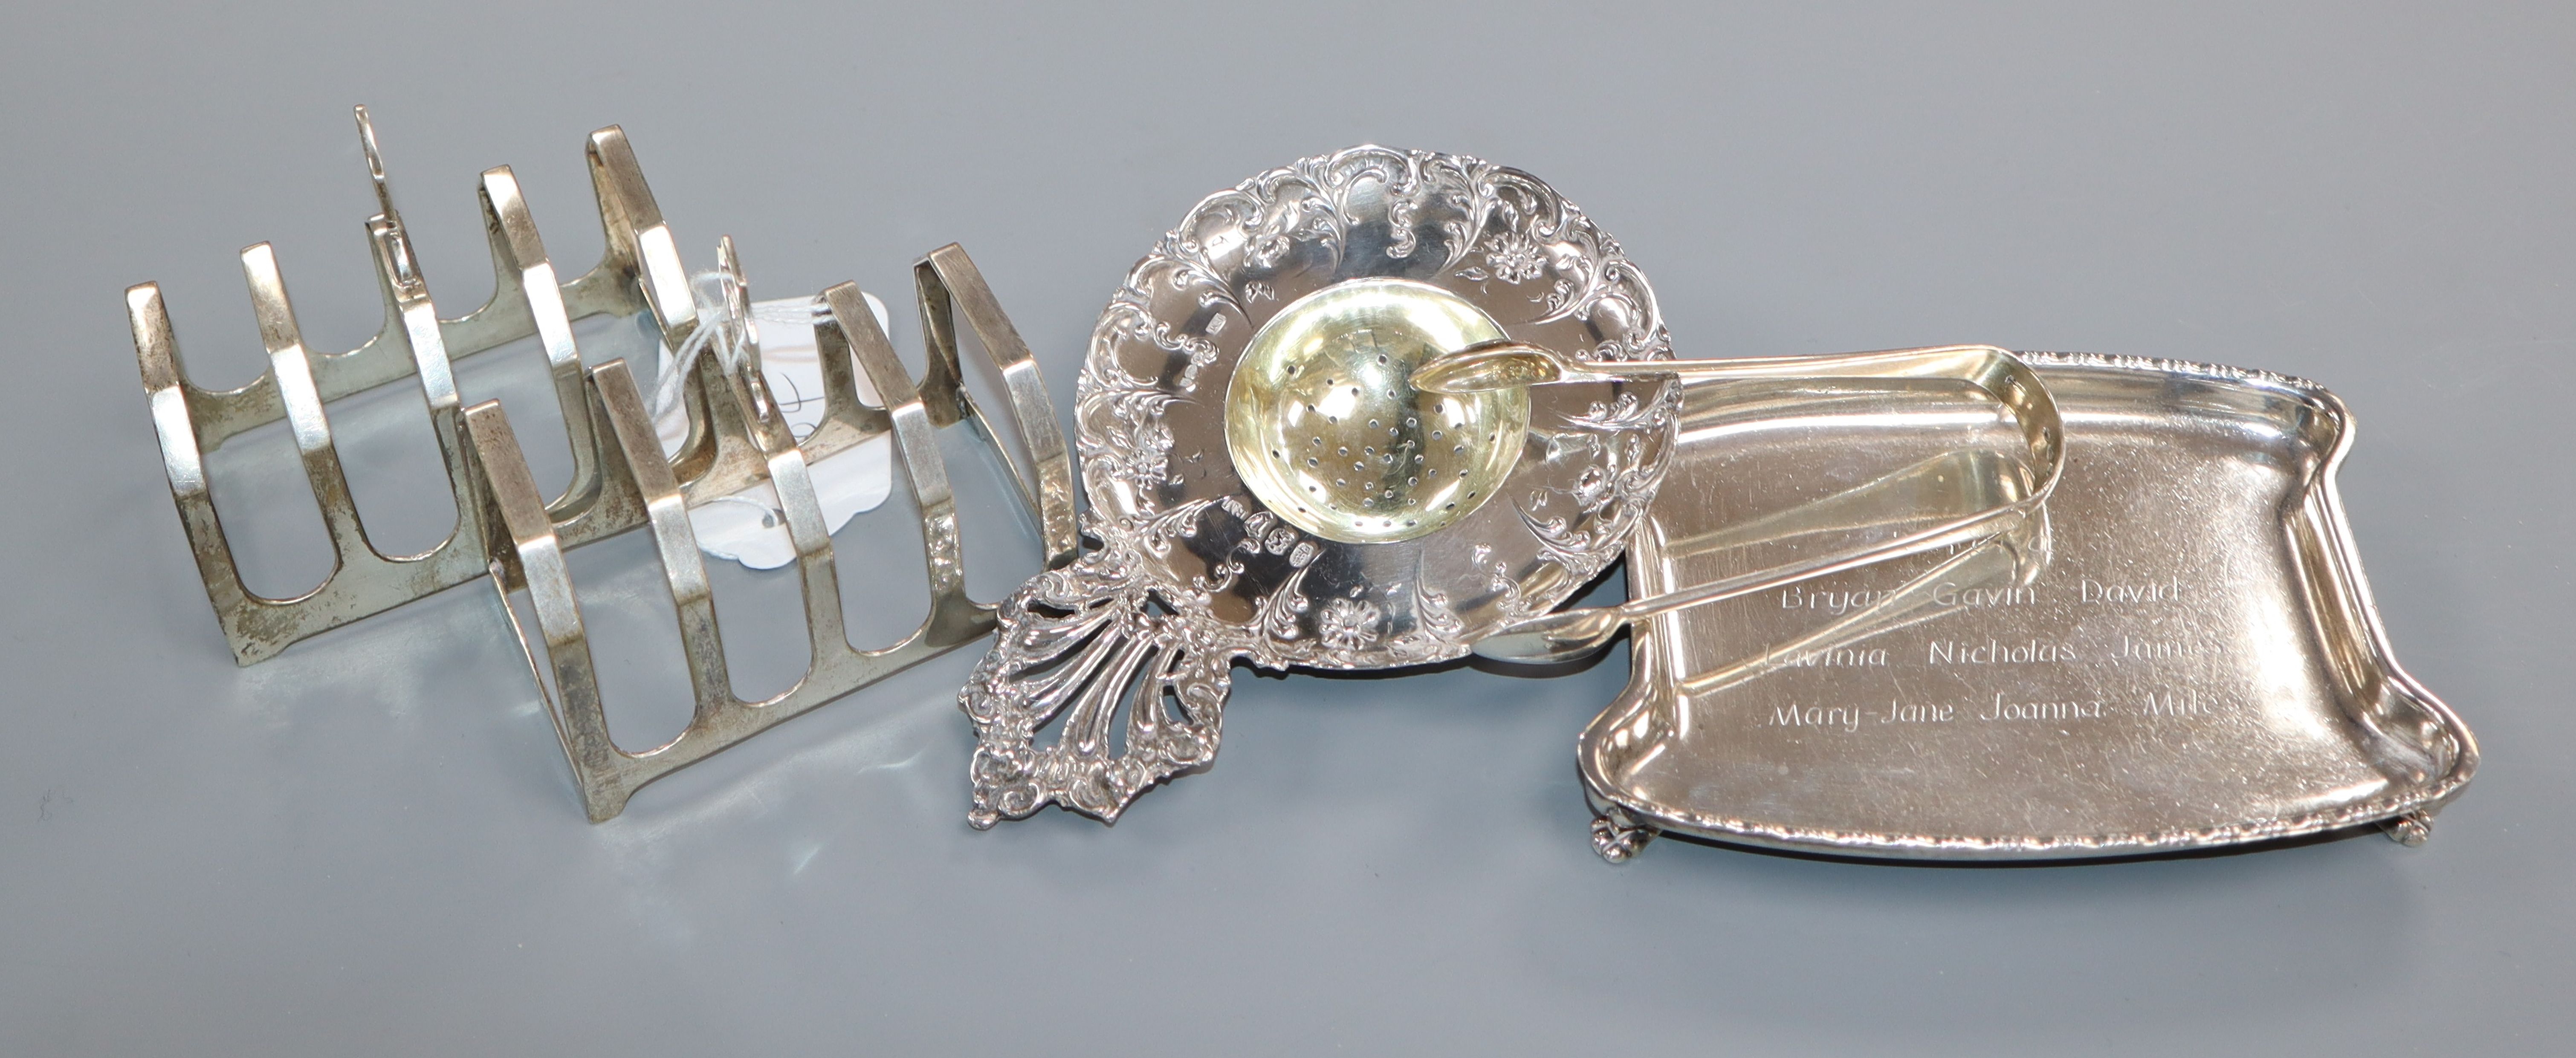 A pair of silver toastracks, a silver presentation dish, a pair of silver sugar tongs and a white